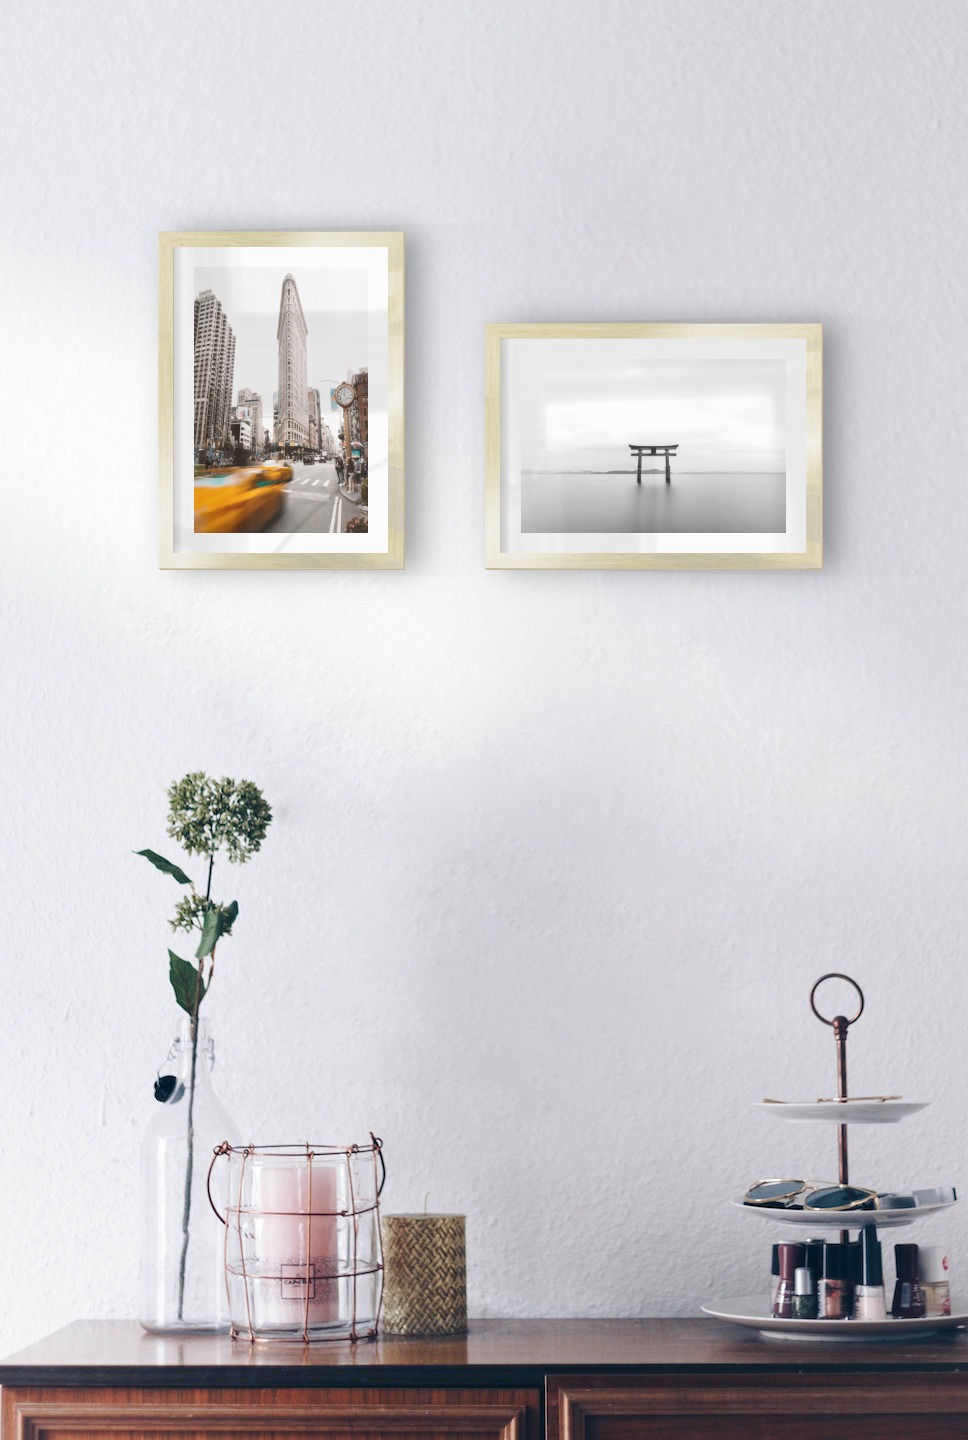 Gallery wall with picture frames in gold in sizes 21x30 with prints "Yellow taxis in town" and "Pillars in the water"